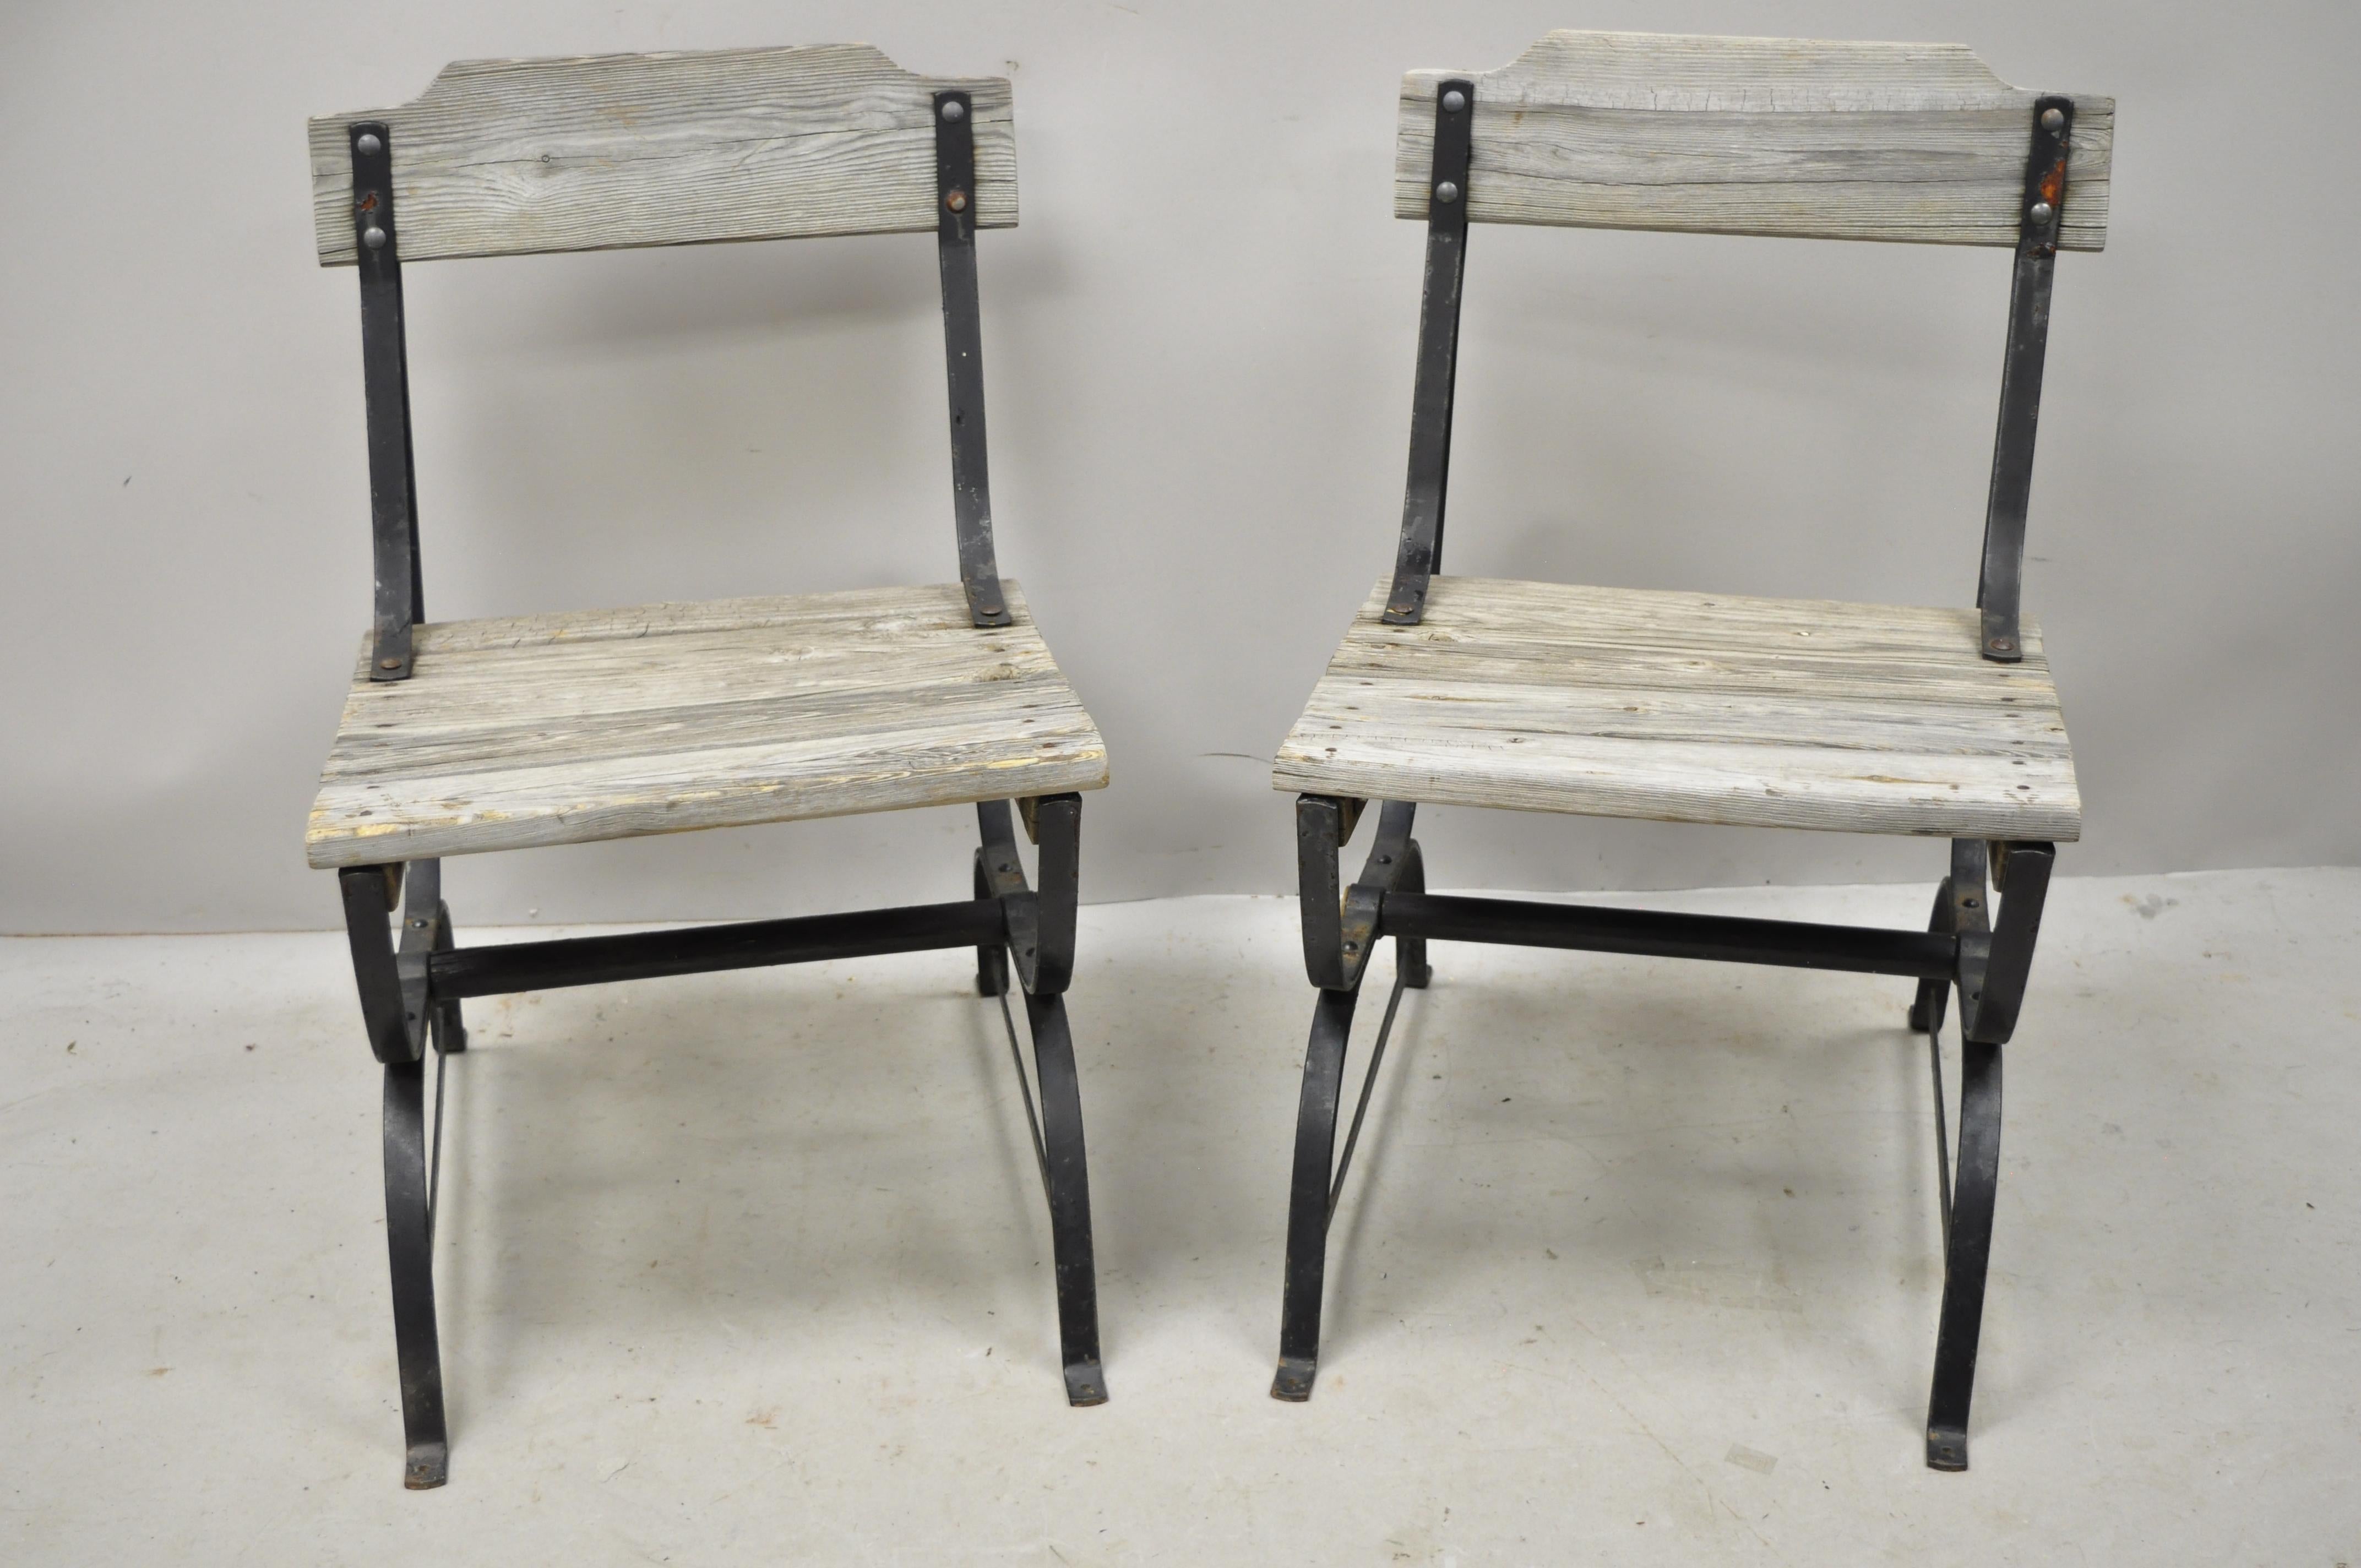 Pair of antique French industrial wrought iron wooden slat seat and back side chairs. Item features wood slat seats and backs, wrought iron construction, wooden stretcher base, distressed finish, very nice antique item, great style and form, circa